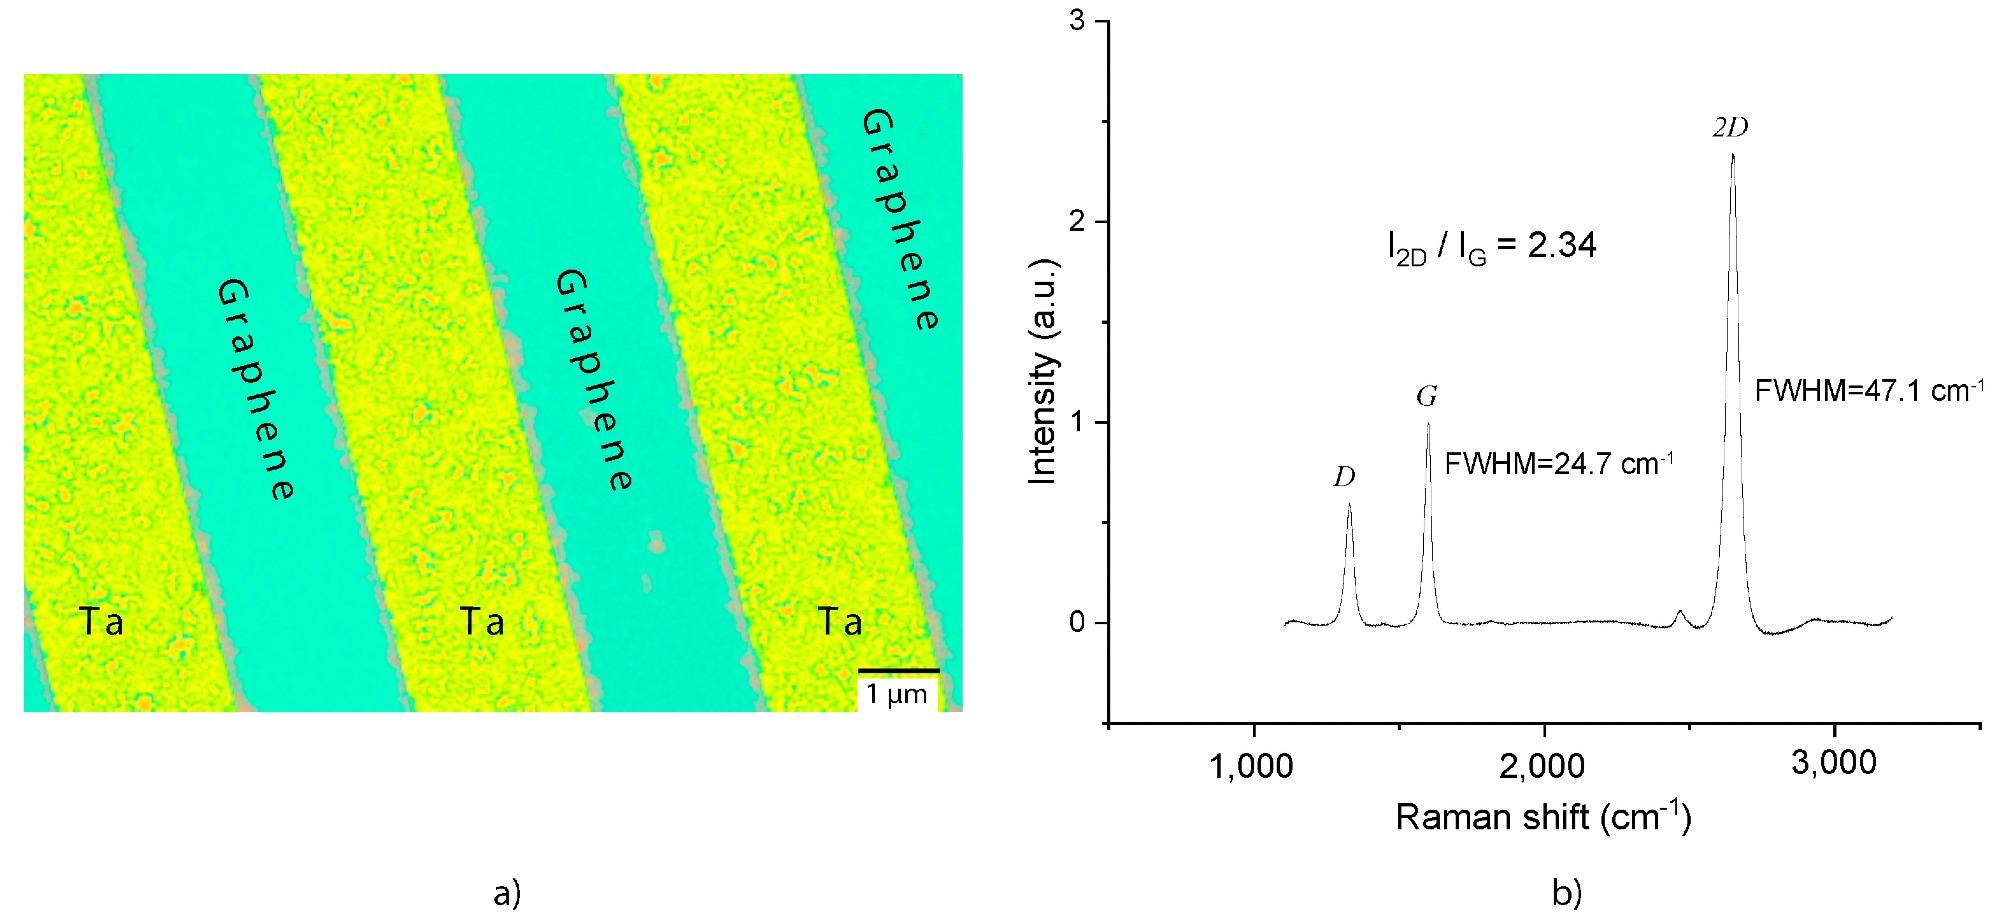 (a) Optical micrograph of a wafer with patterned Ta blocking structures (yellow) and transferless CVD graphene (turquoise). The graphene is grown at the interface between the SiO2 substrate and the Pt seed layer that is removed afterwards. (b) Raman spectrum of CVD graphene layer between Ta blocking structures, yielding Raman peak intensity ratios I2D/IG=2.34 and ID/I2D=0.24 and FWHM2D ˜ 47 cm-1 representative for monolayer graphene.